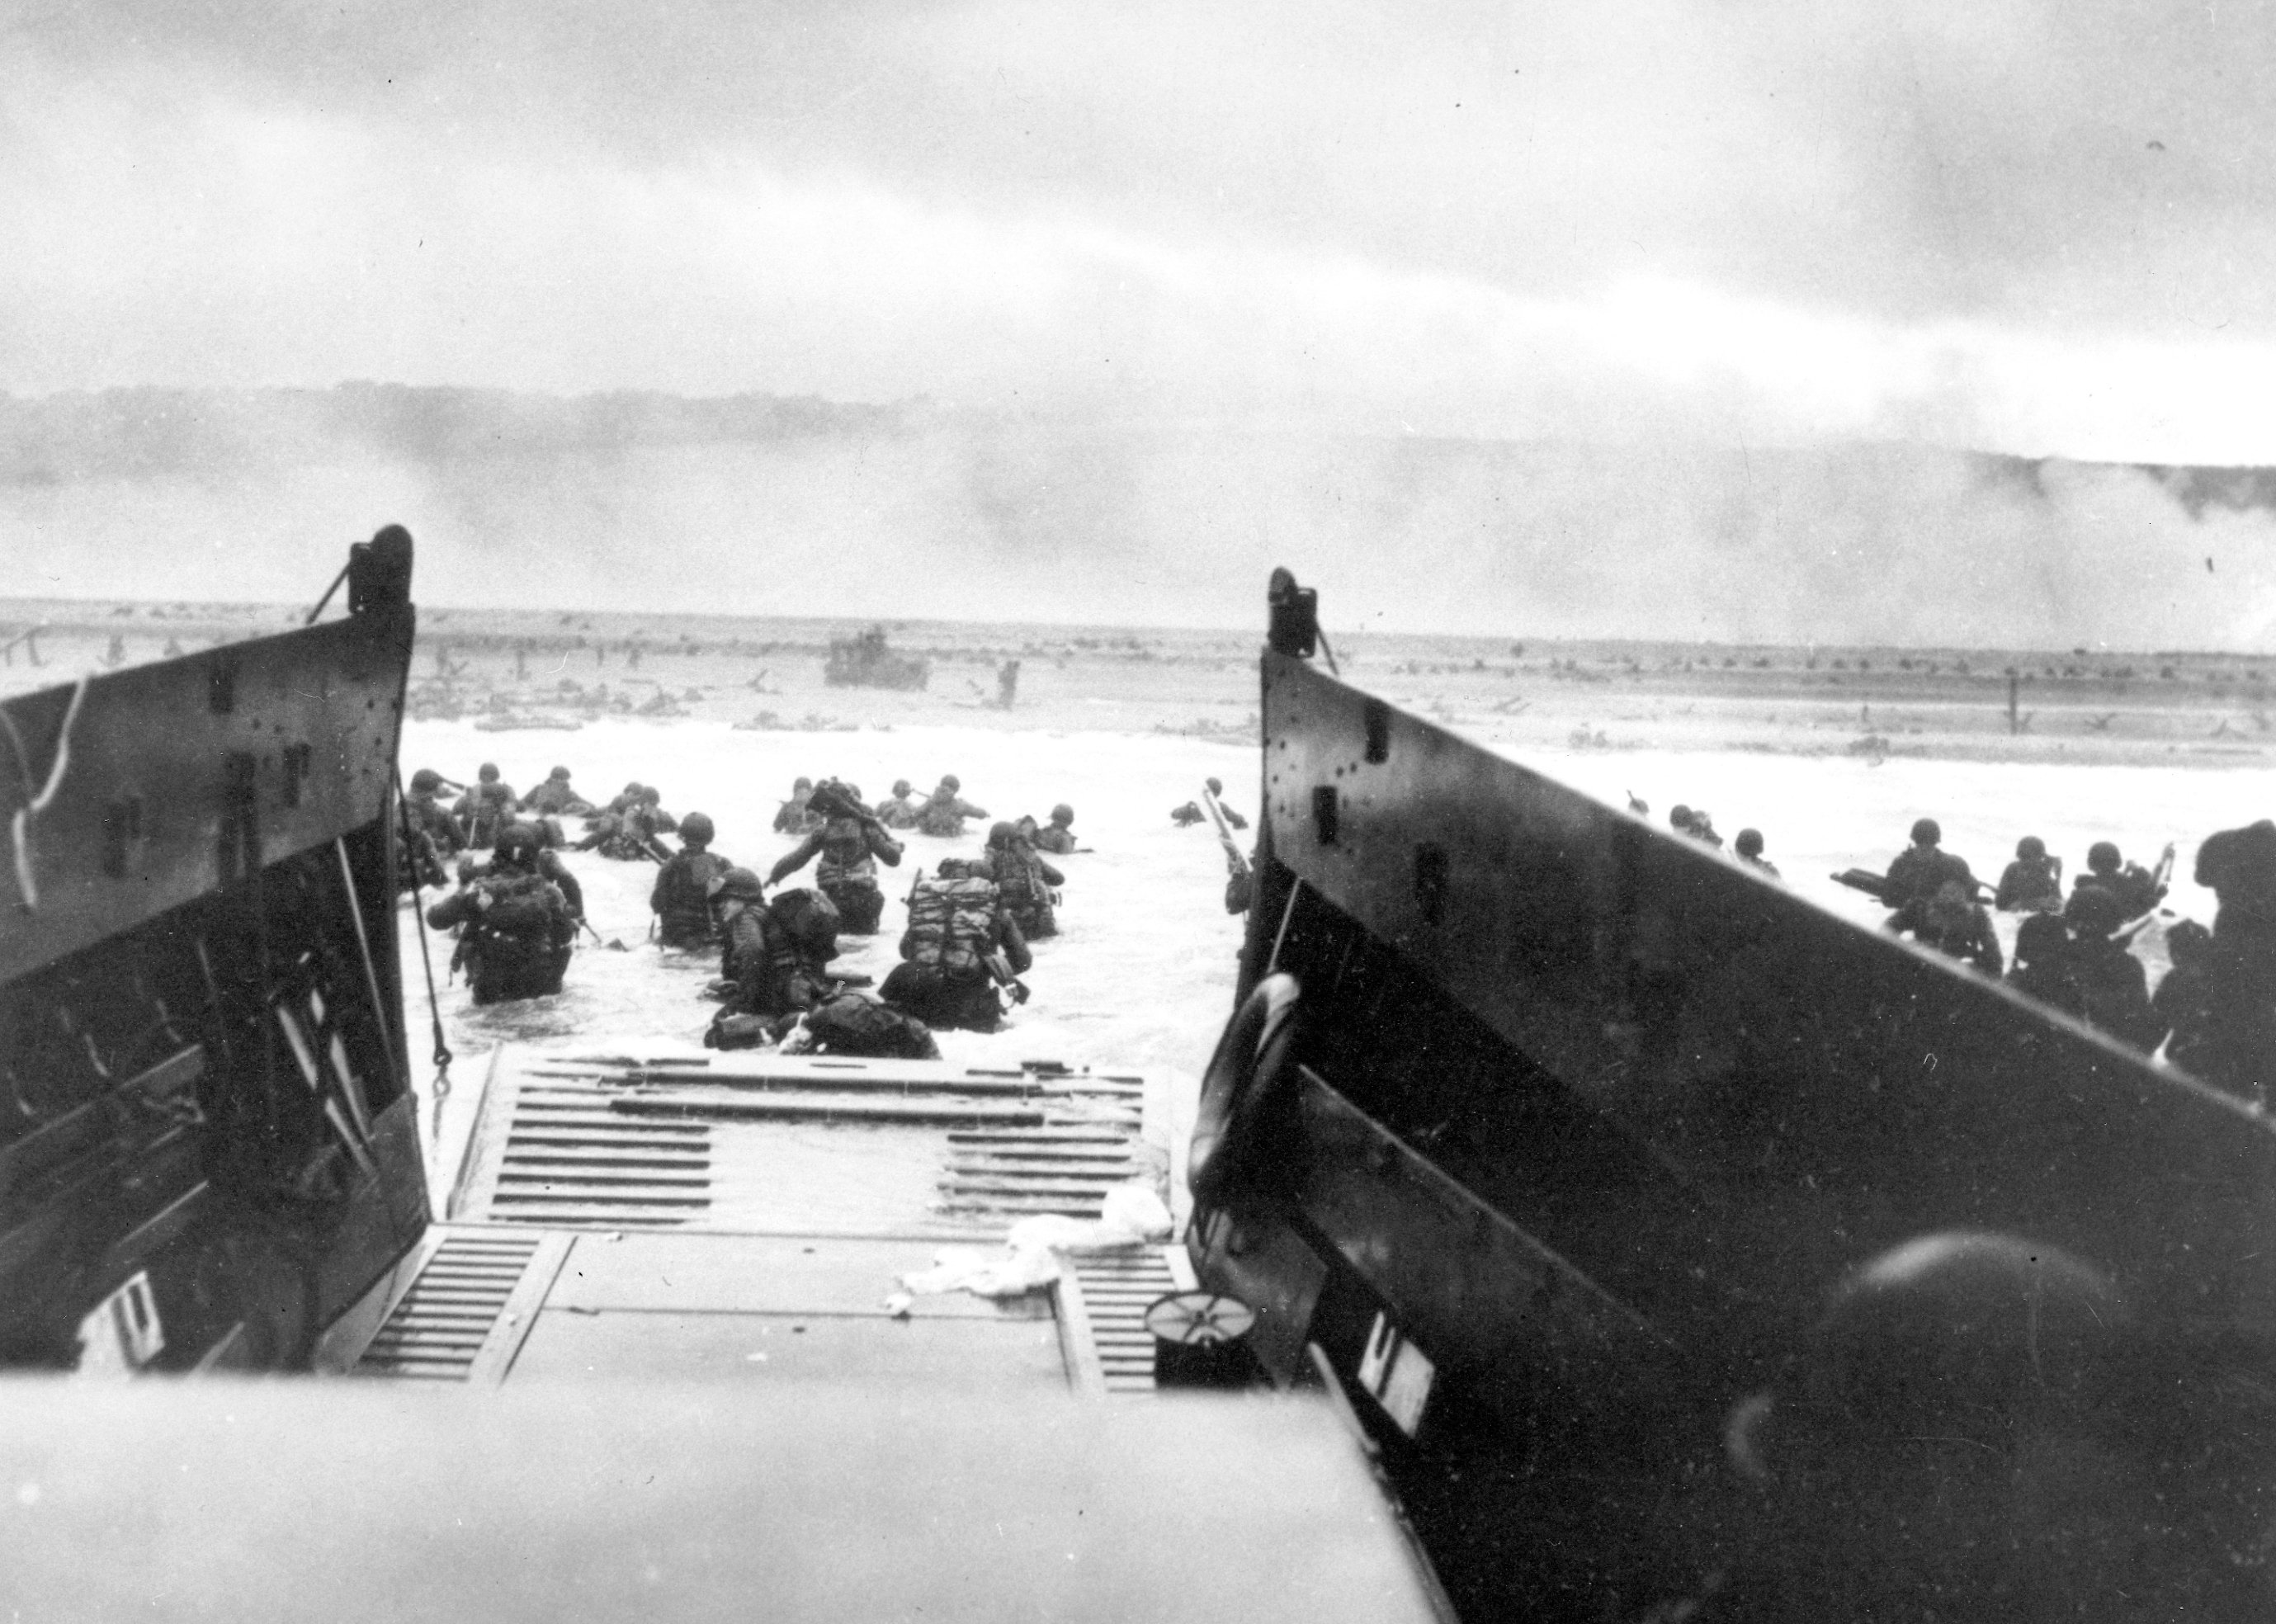 FILE - In this June 8, 1944, file photo, under heavy German machine gun fire, American infantrymen wade ashore off the ramp of a Coast Guard landing craft during the invasion of the French coast of Normandy in World War II. June 6, 2019, marks the 75th anniversary of D-Day, the assault that began the liberation of France and Europe from German occupation, leading to the end World War II. (U.S. Coast Guard via AP, File)